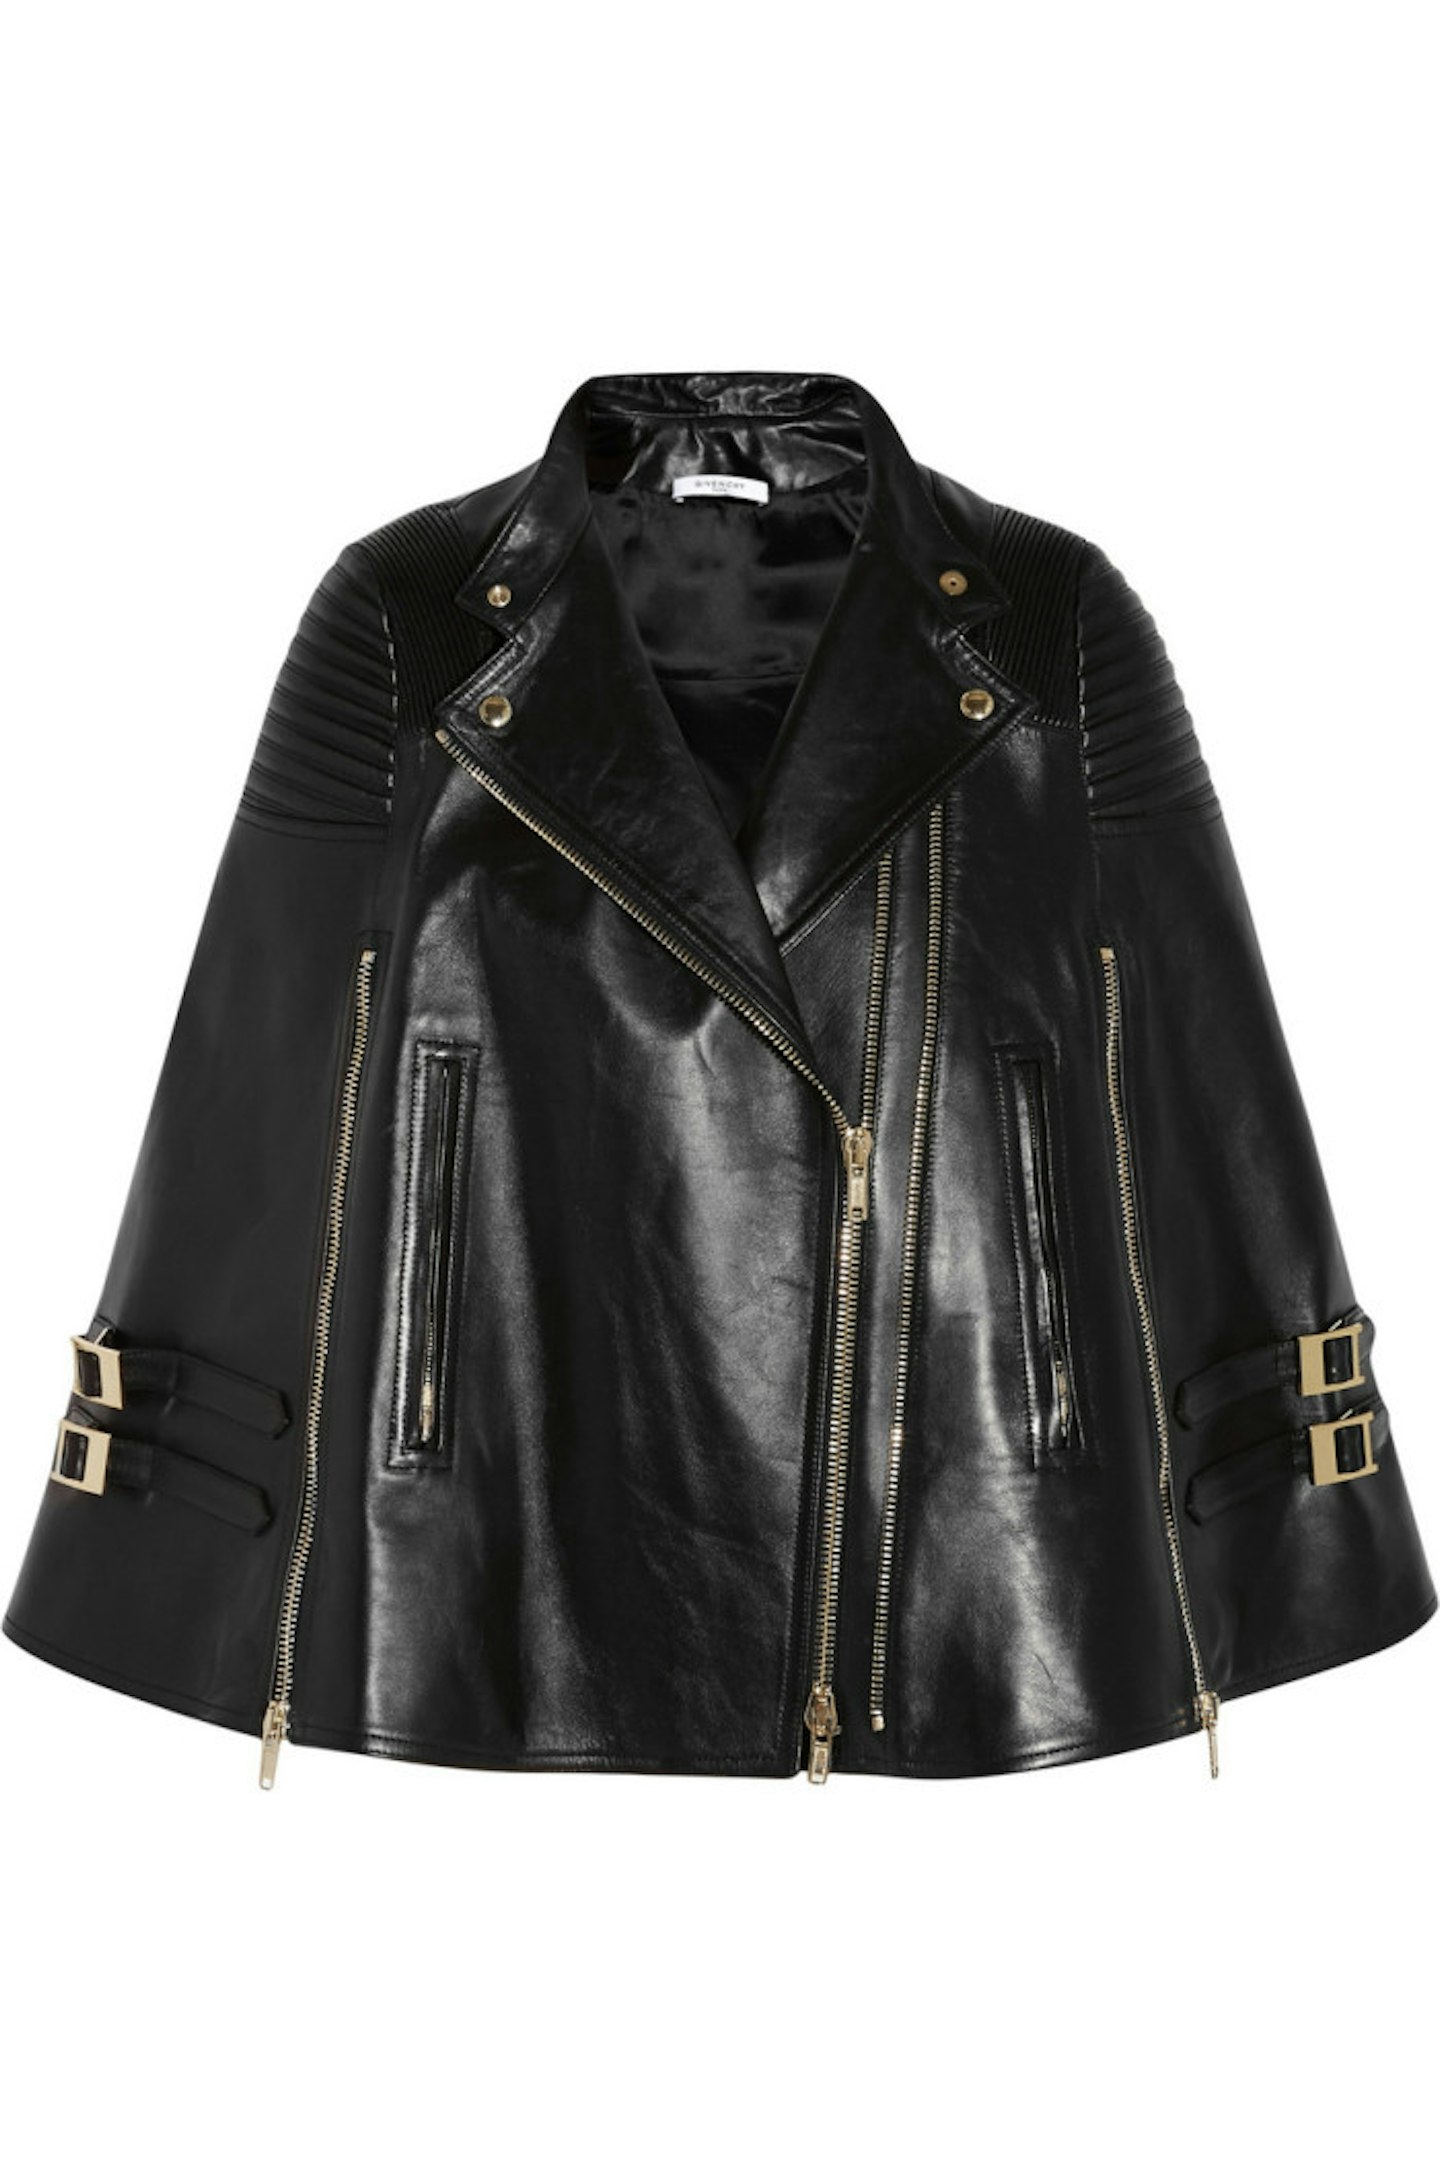 Givenchy Leather Cape, £3,600.00